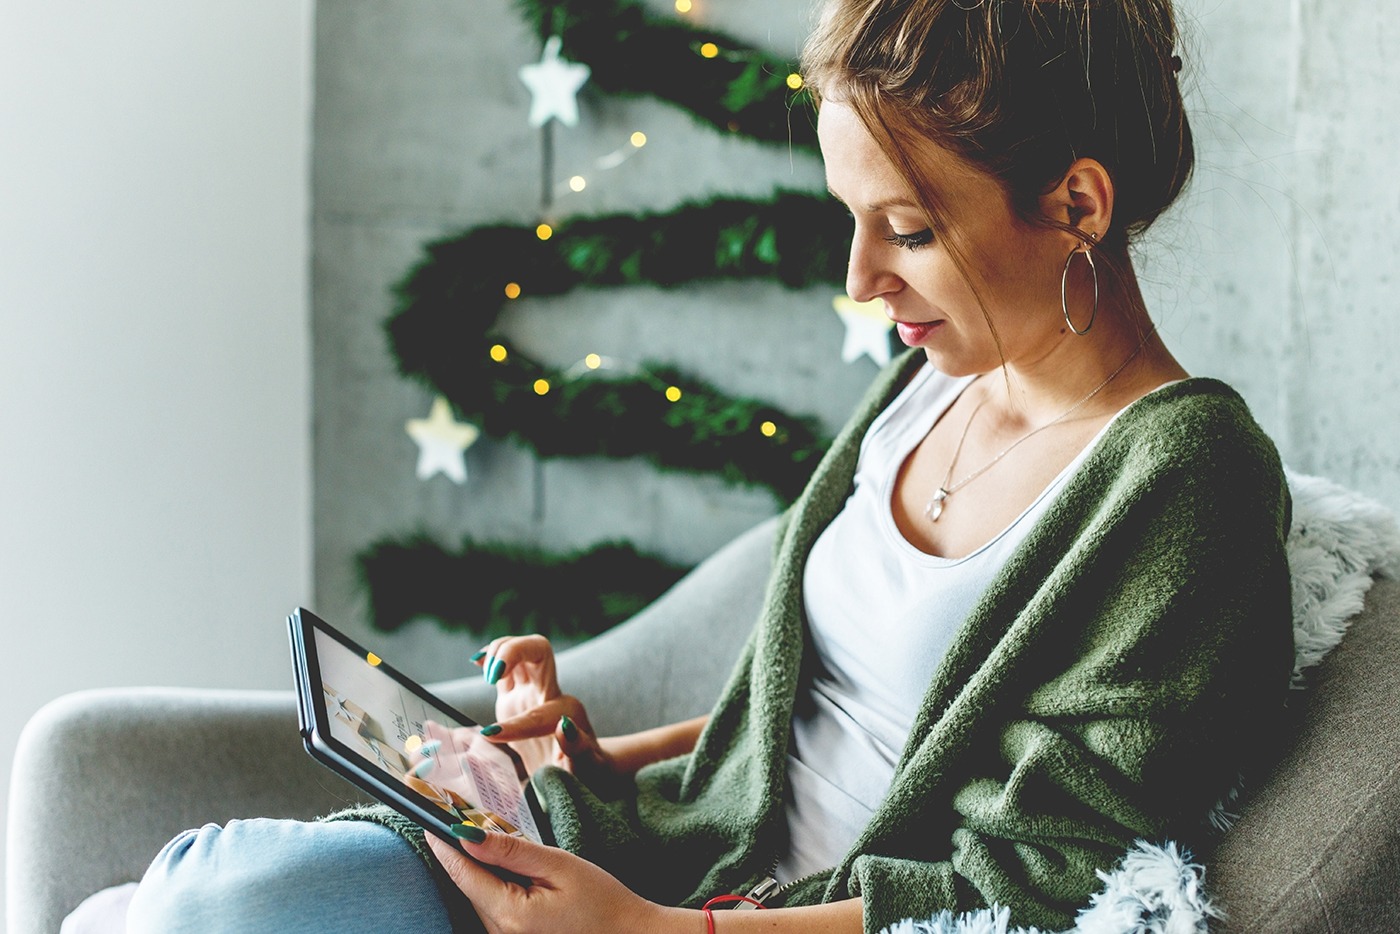 Using Qualitative Insights to Better Understand the Holiday Shopping Mindset